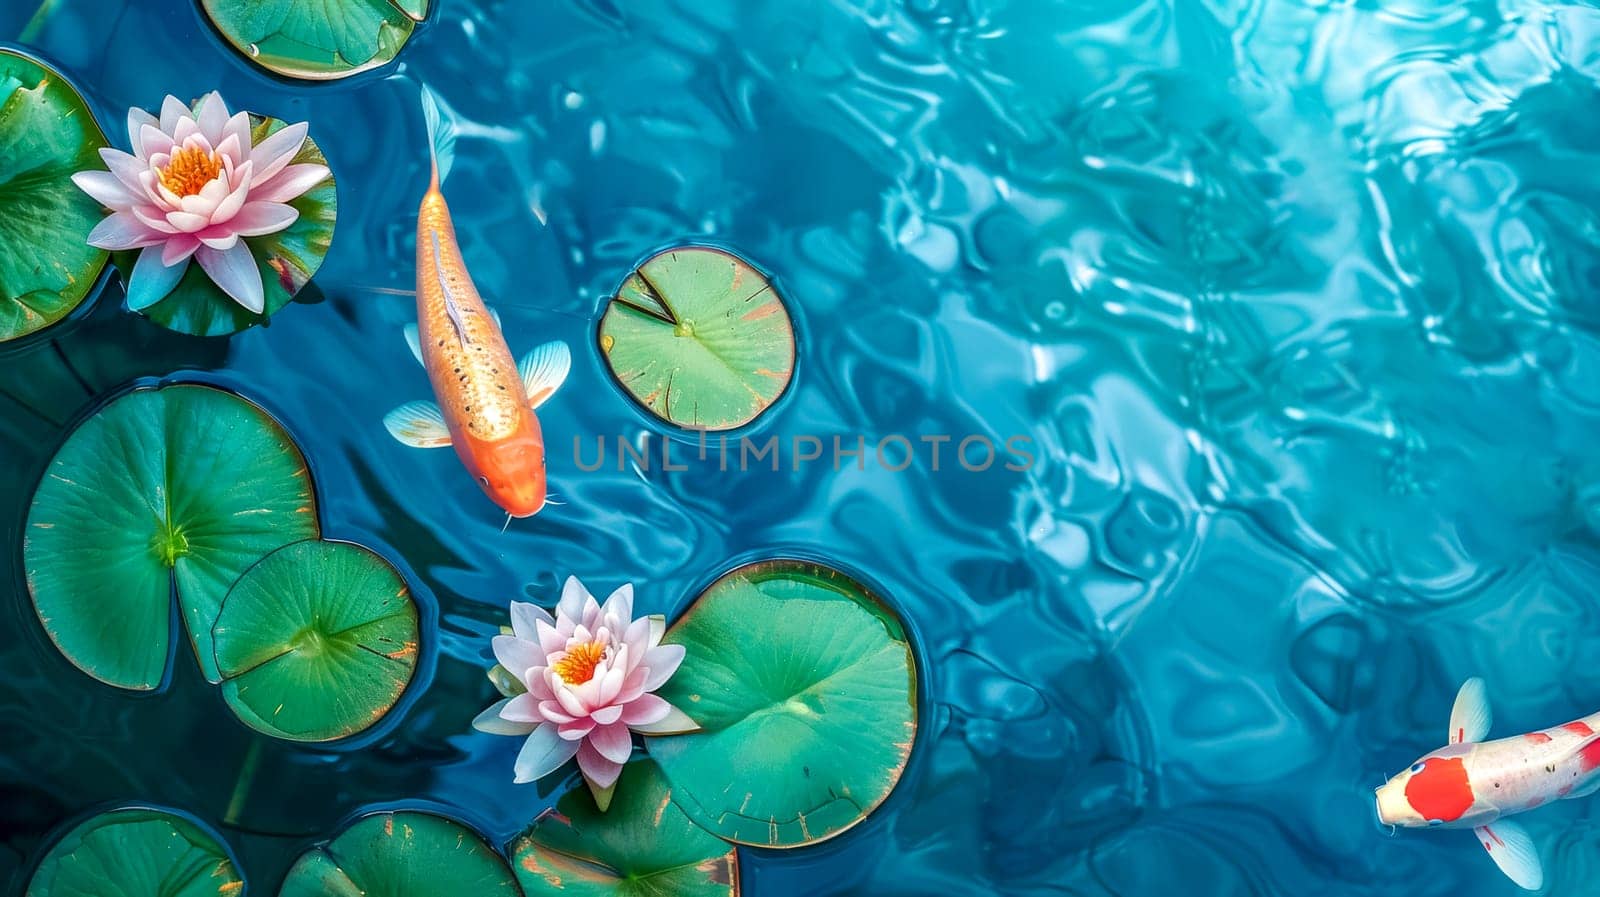 Serene koi pond with water lilies by Edophoto